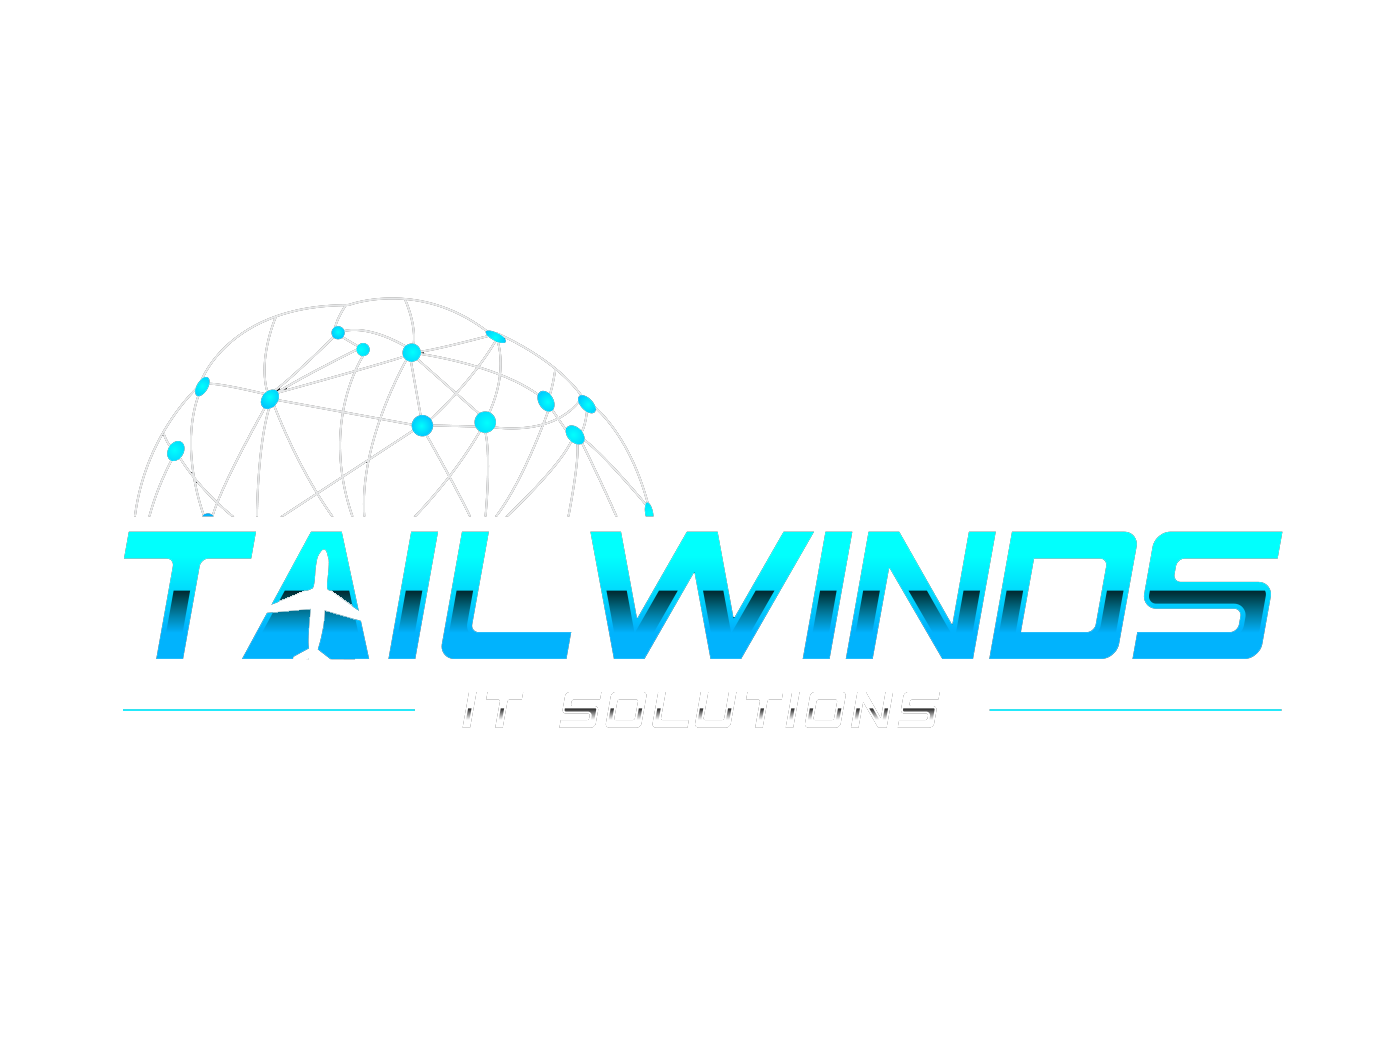 IT Support, Managed IT Services Company, Melbourne, Vero Beach, Florida | Tailwinds IT Solutions Logo